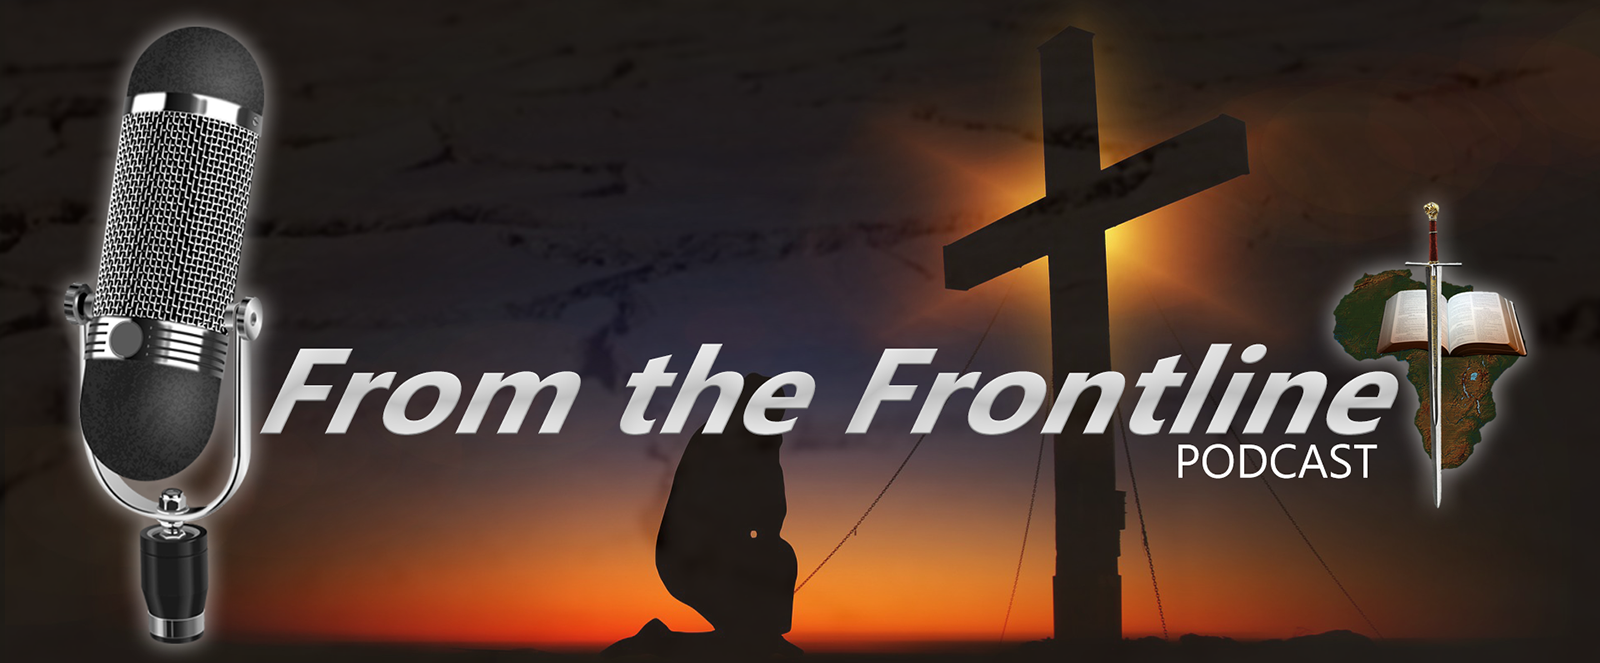 From The Frontline-Episode 5-John Clifford & Hunter Combs-Winning Muslims for Christ Part 1